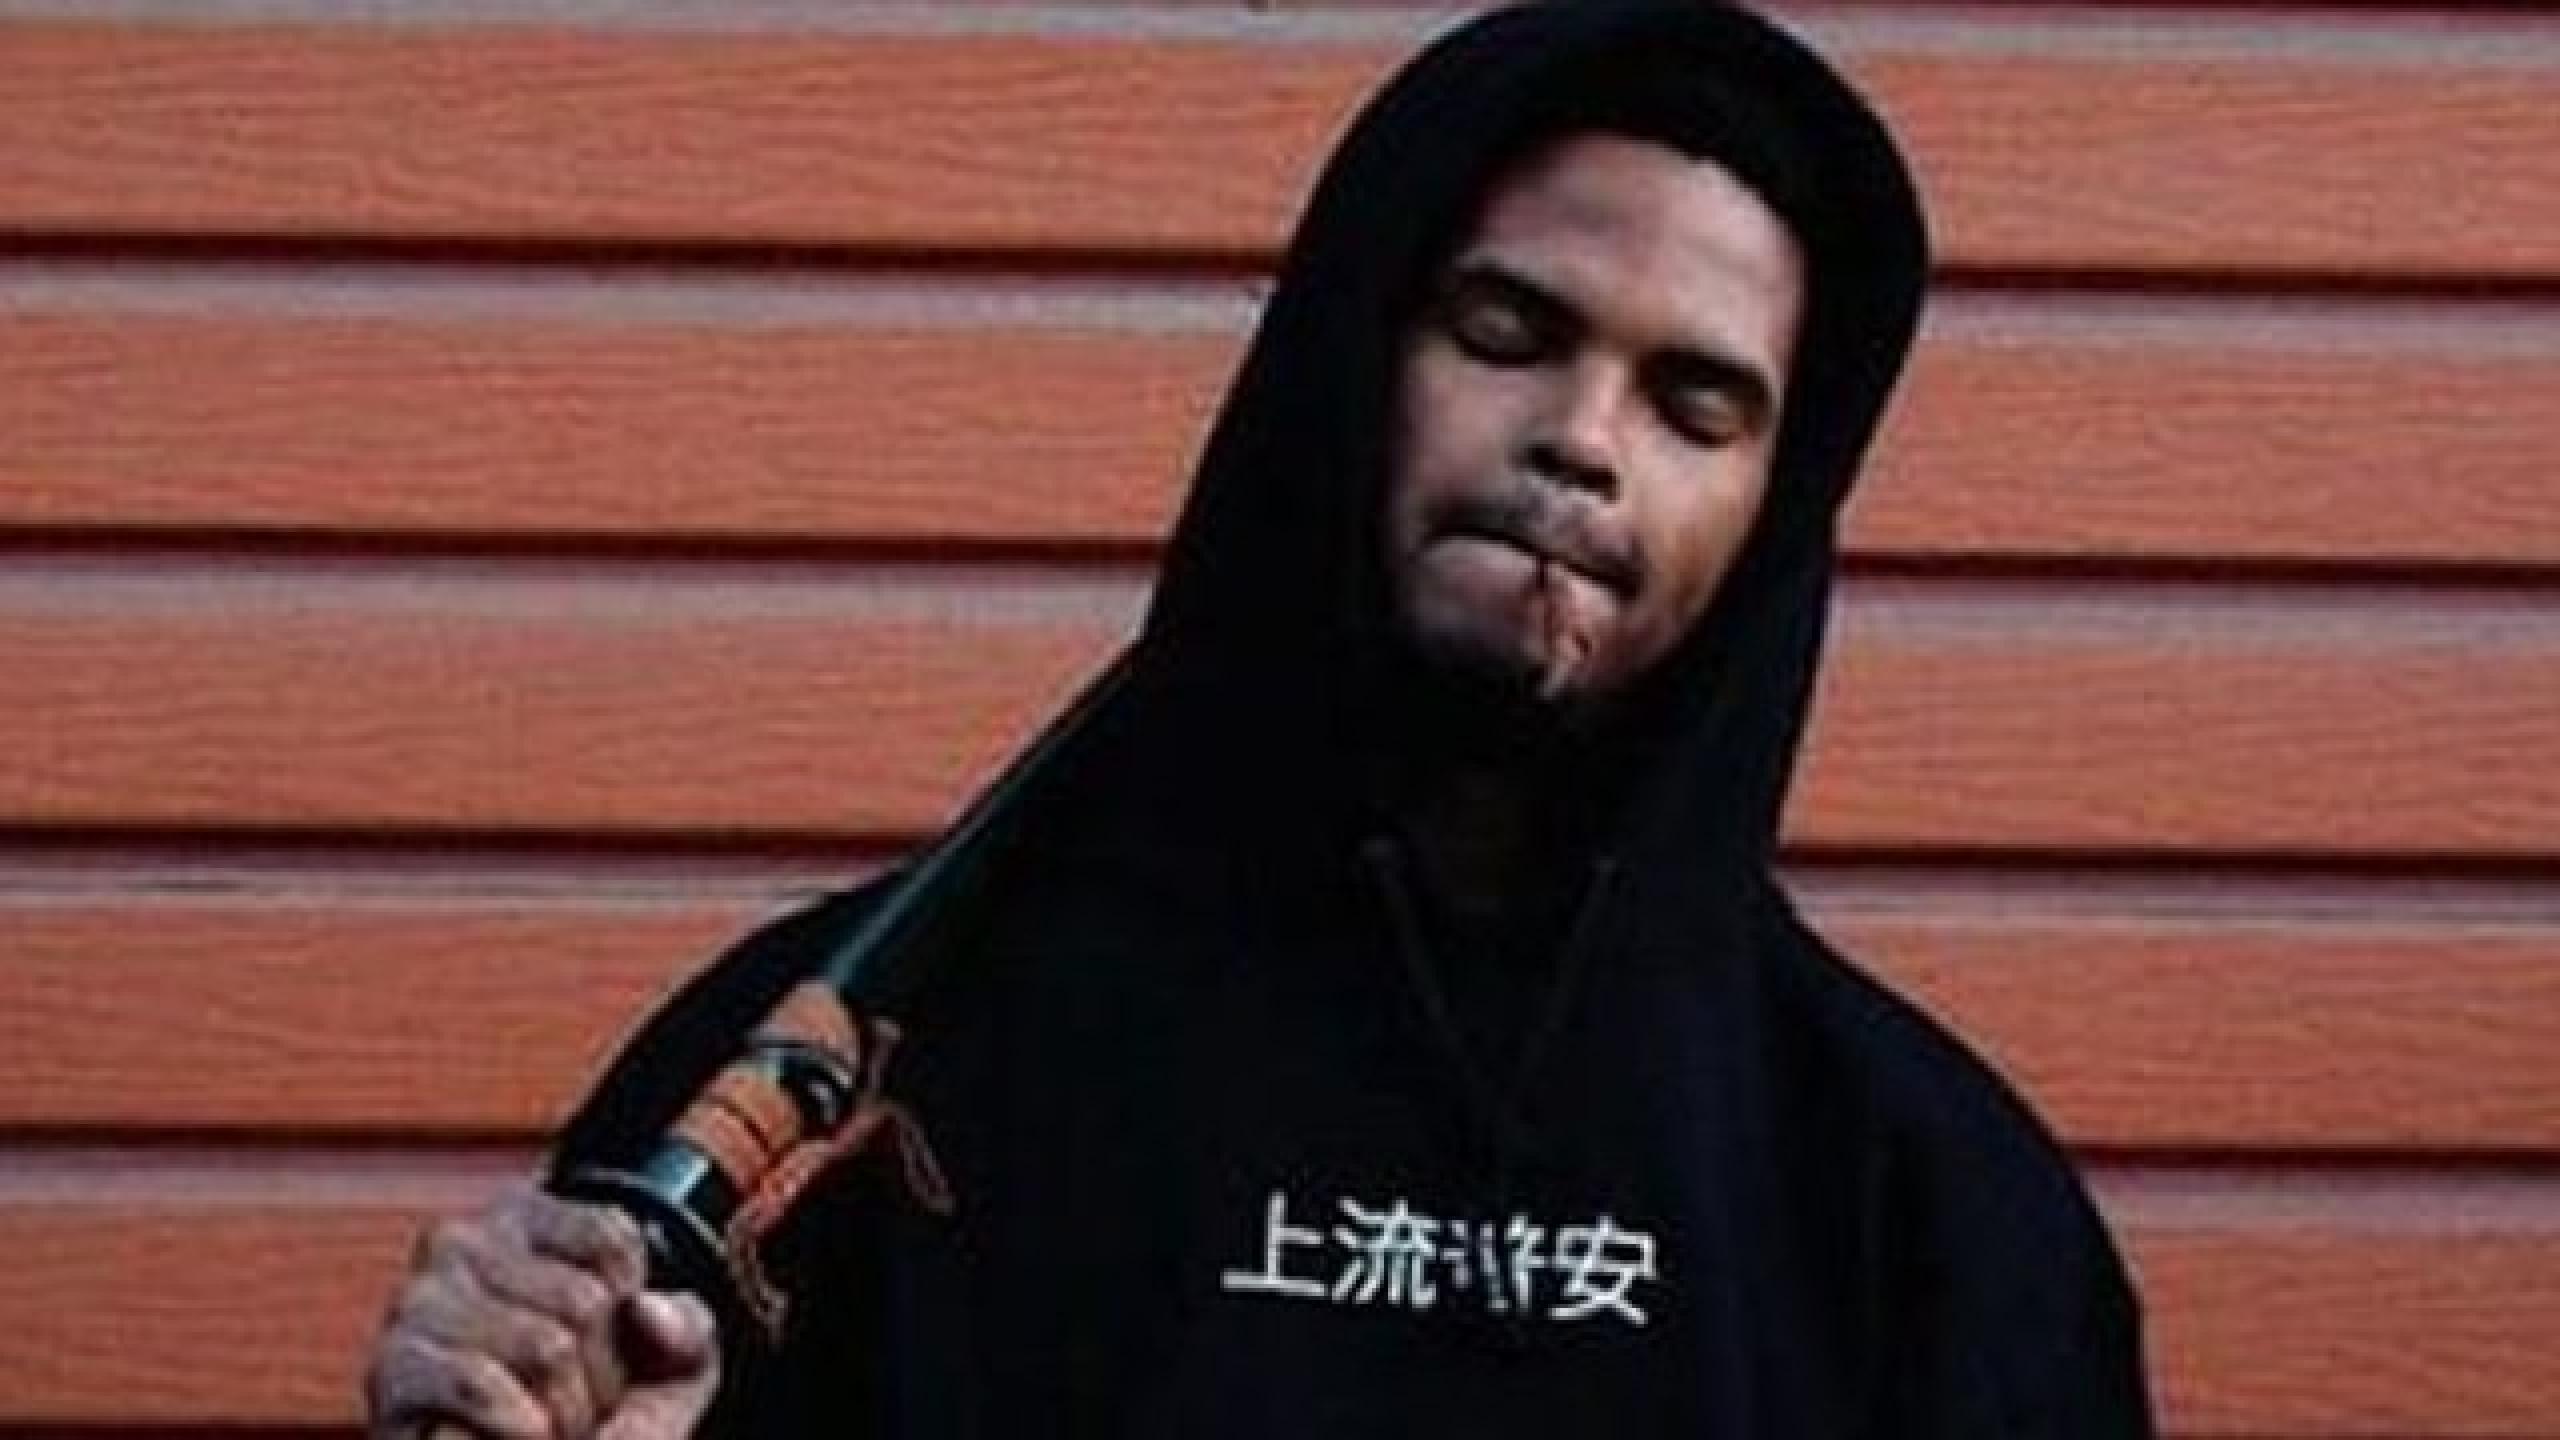 Xavier Wulf tour dates 2022 2023. Xavier Wulf tickets and concerts